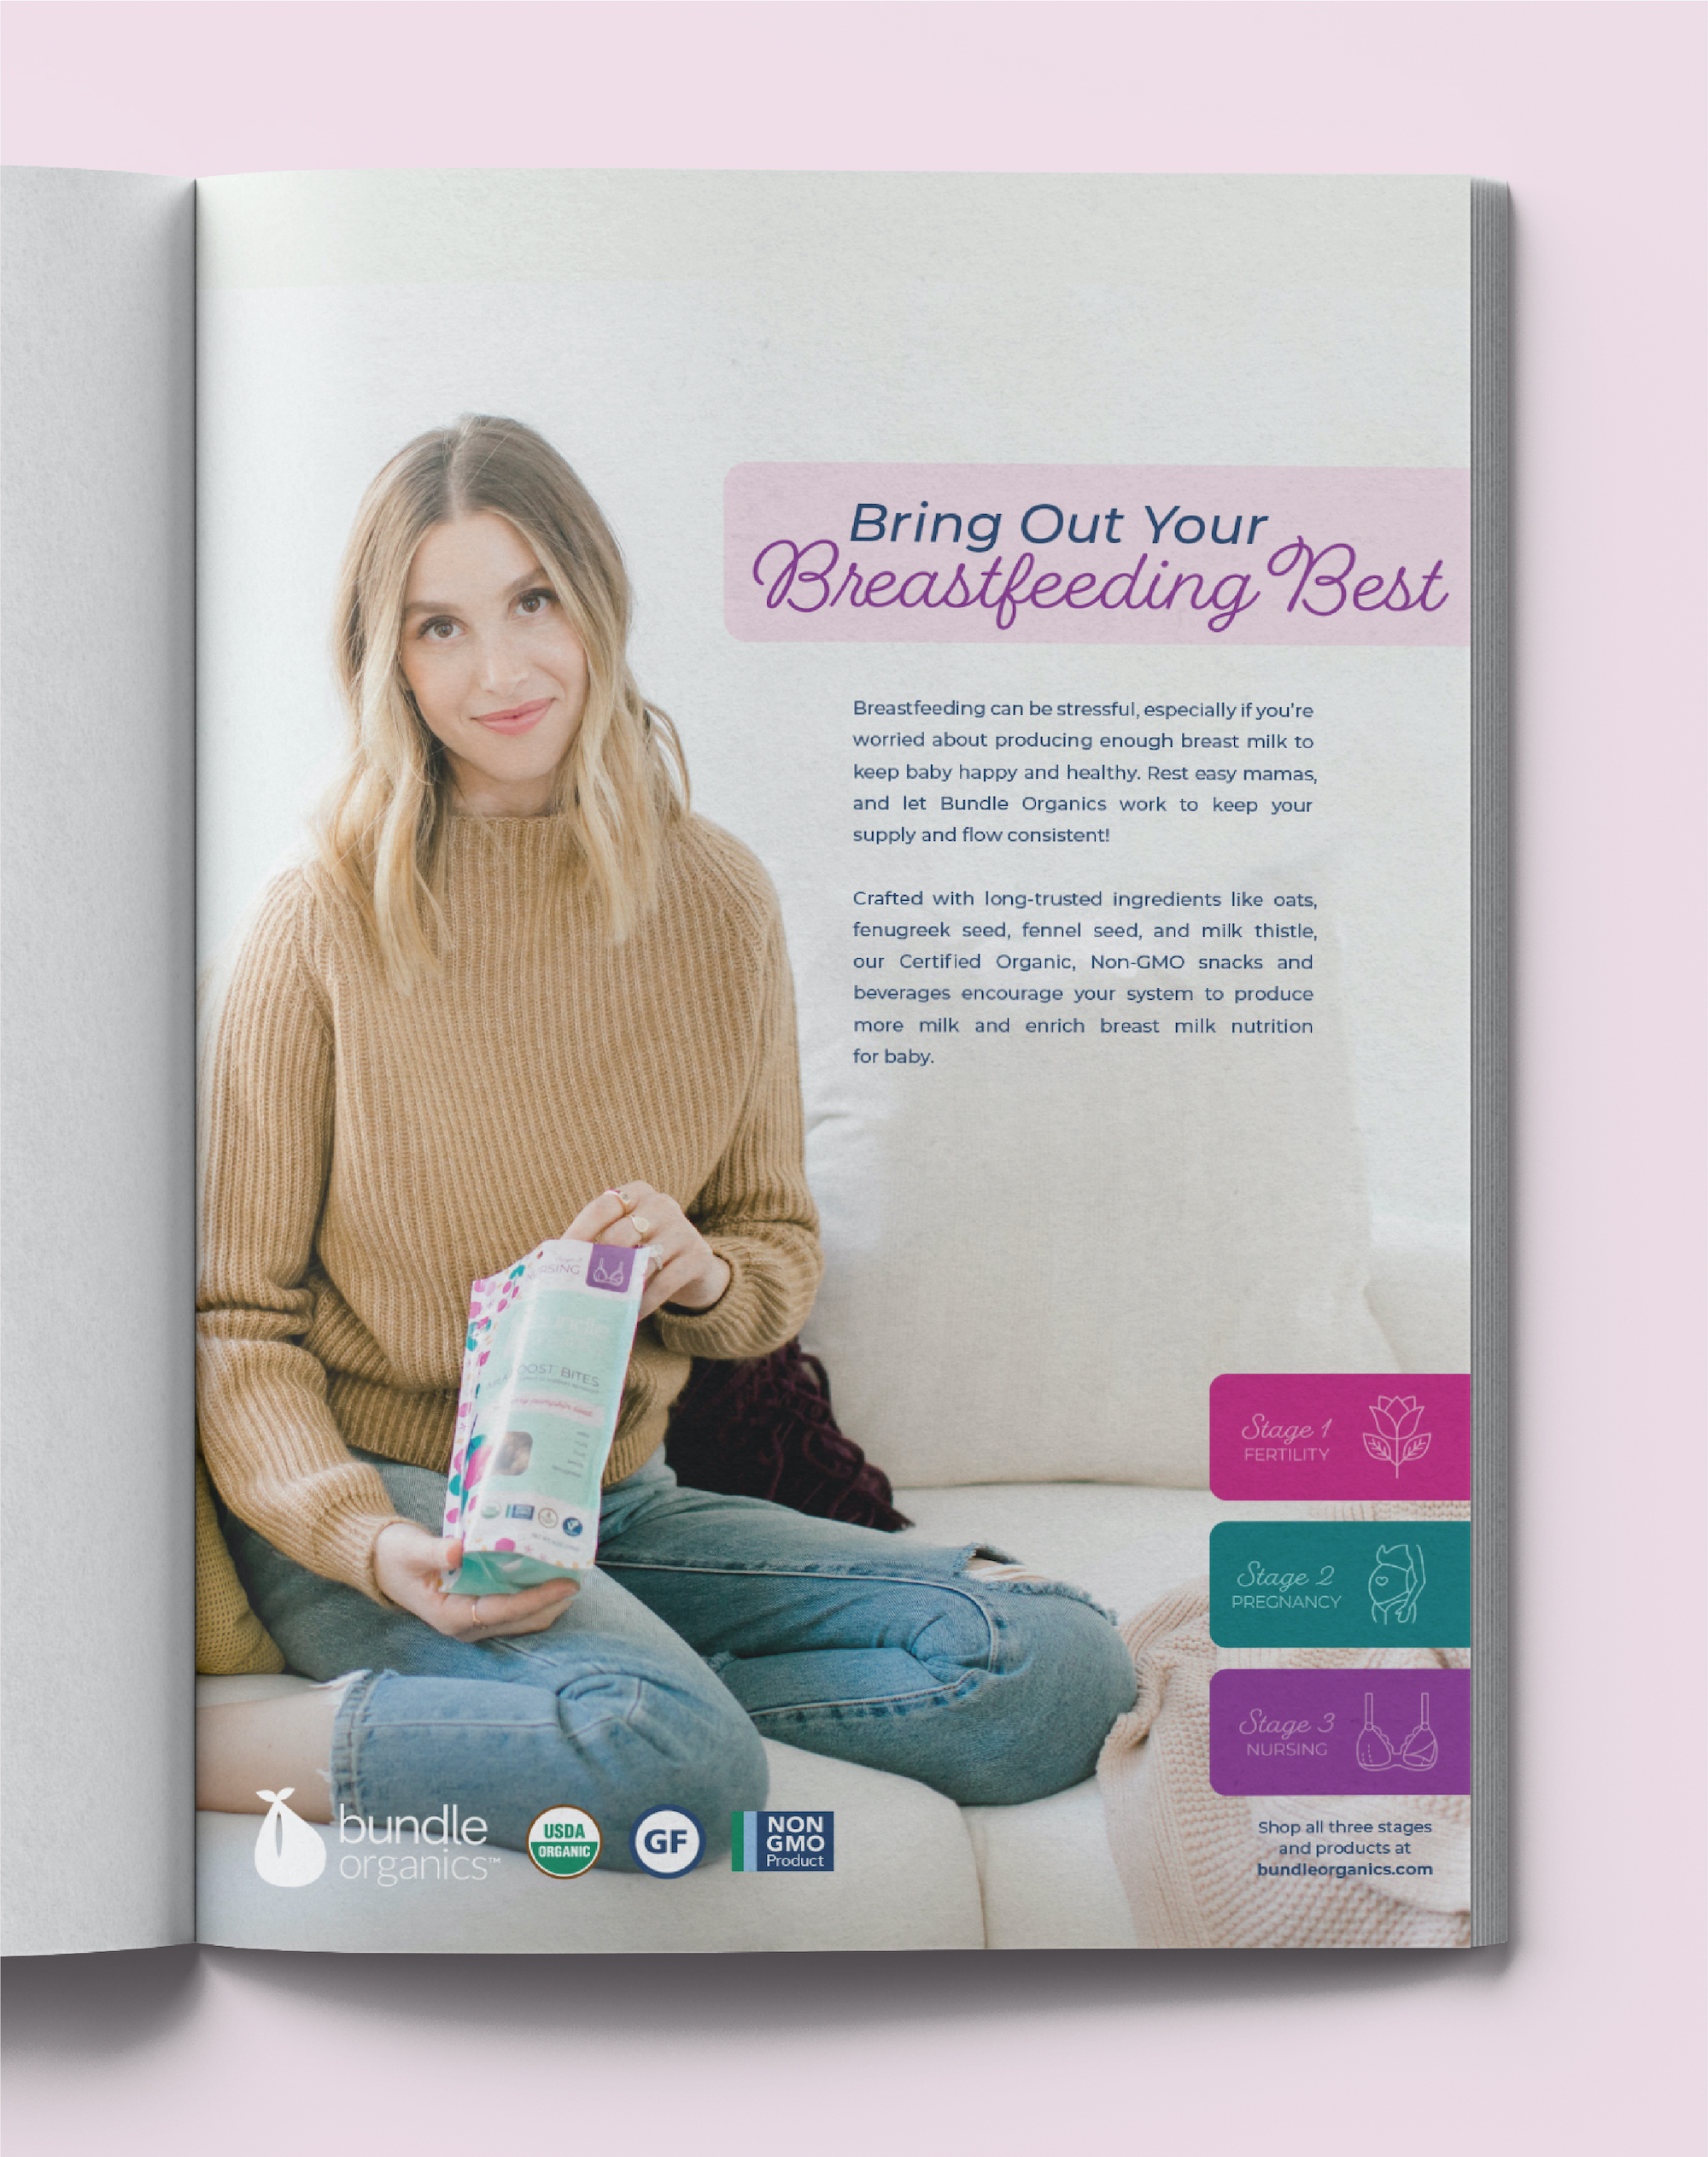 Magazine open to an ad for Bundle Organics including an image of co-founder Whitney Port and a snack product for nursing and breastfeeding support.